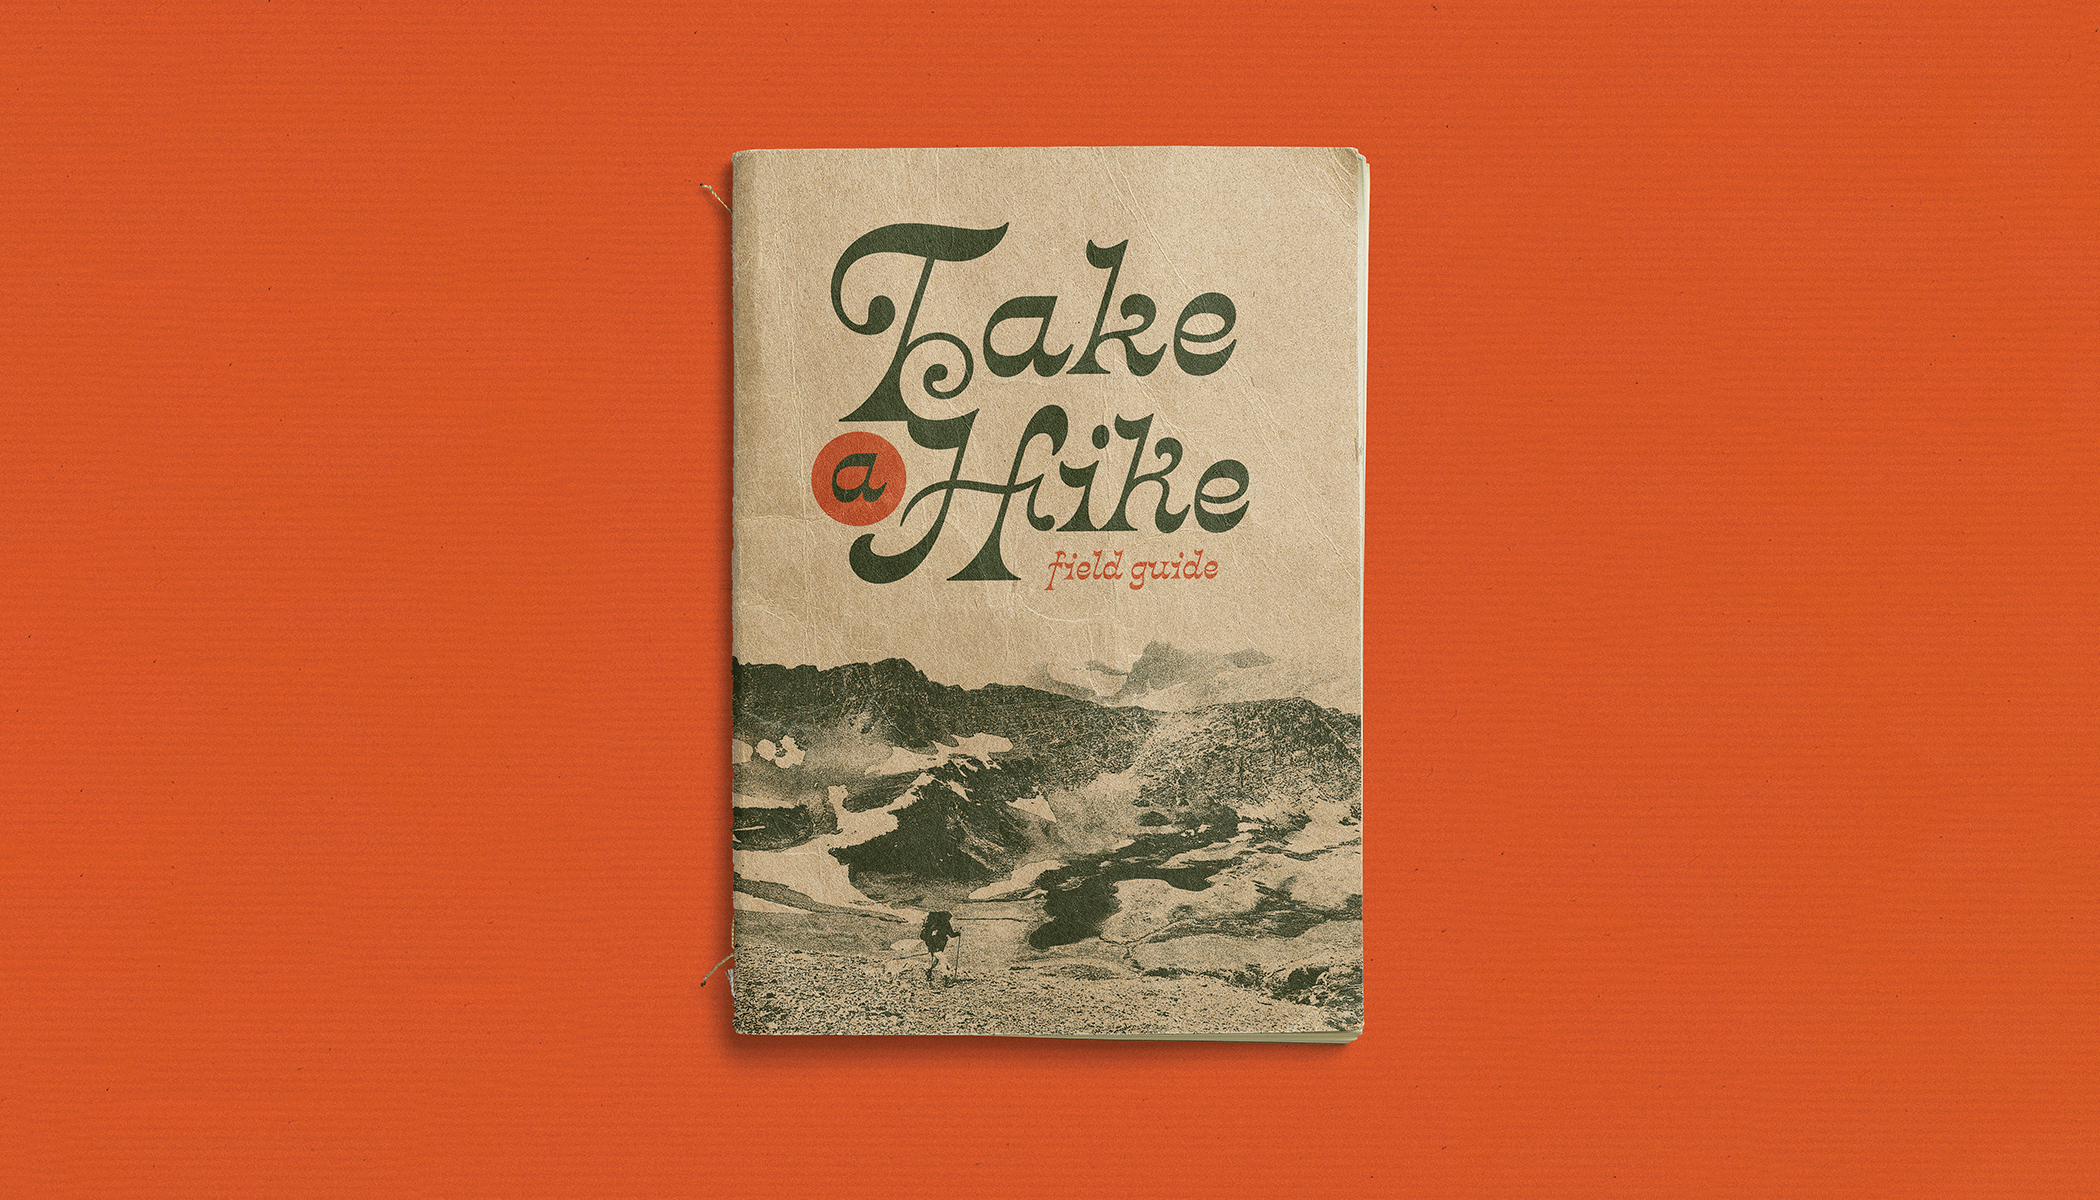 Travel journal with "Take a Hike Field Guide" written on it and a photo of a hiker walking in front of a mountain range.